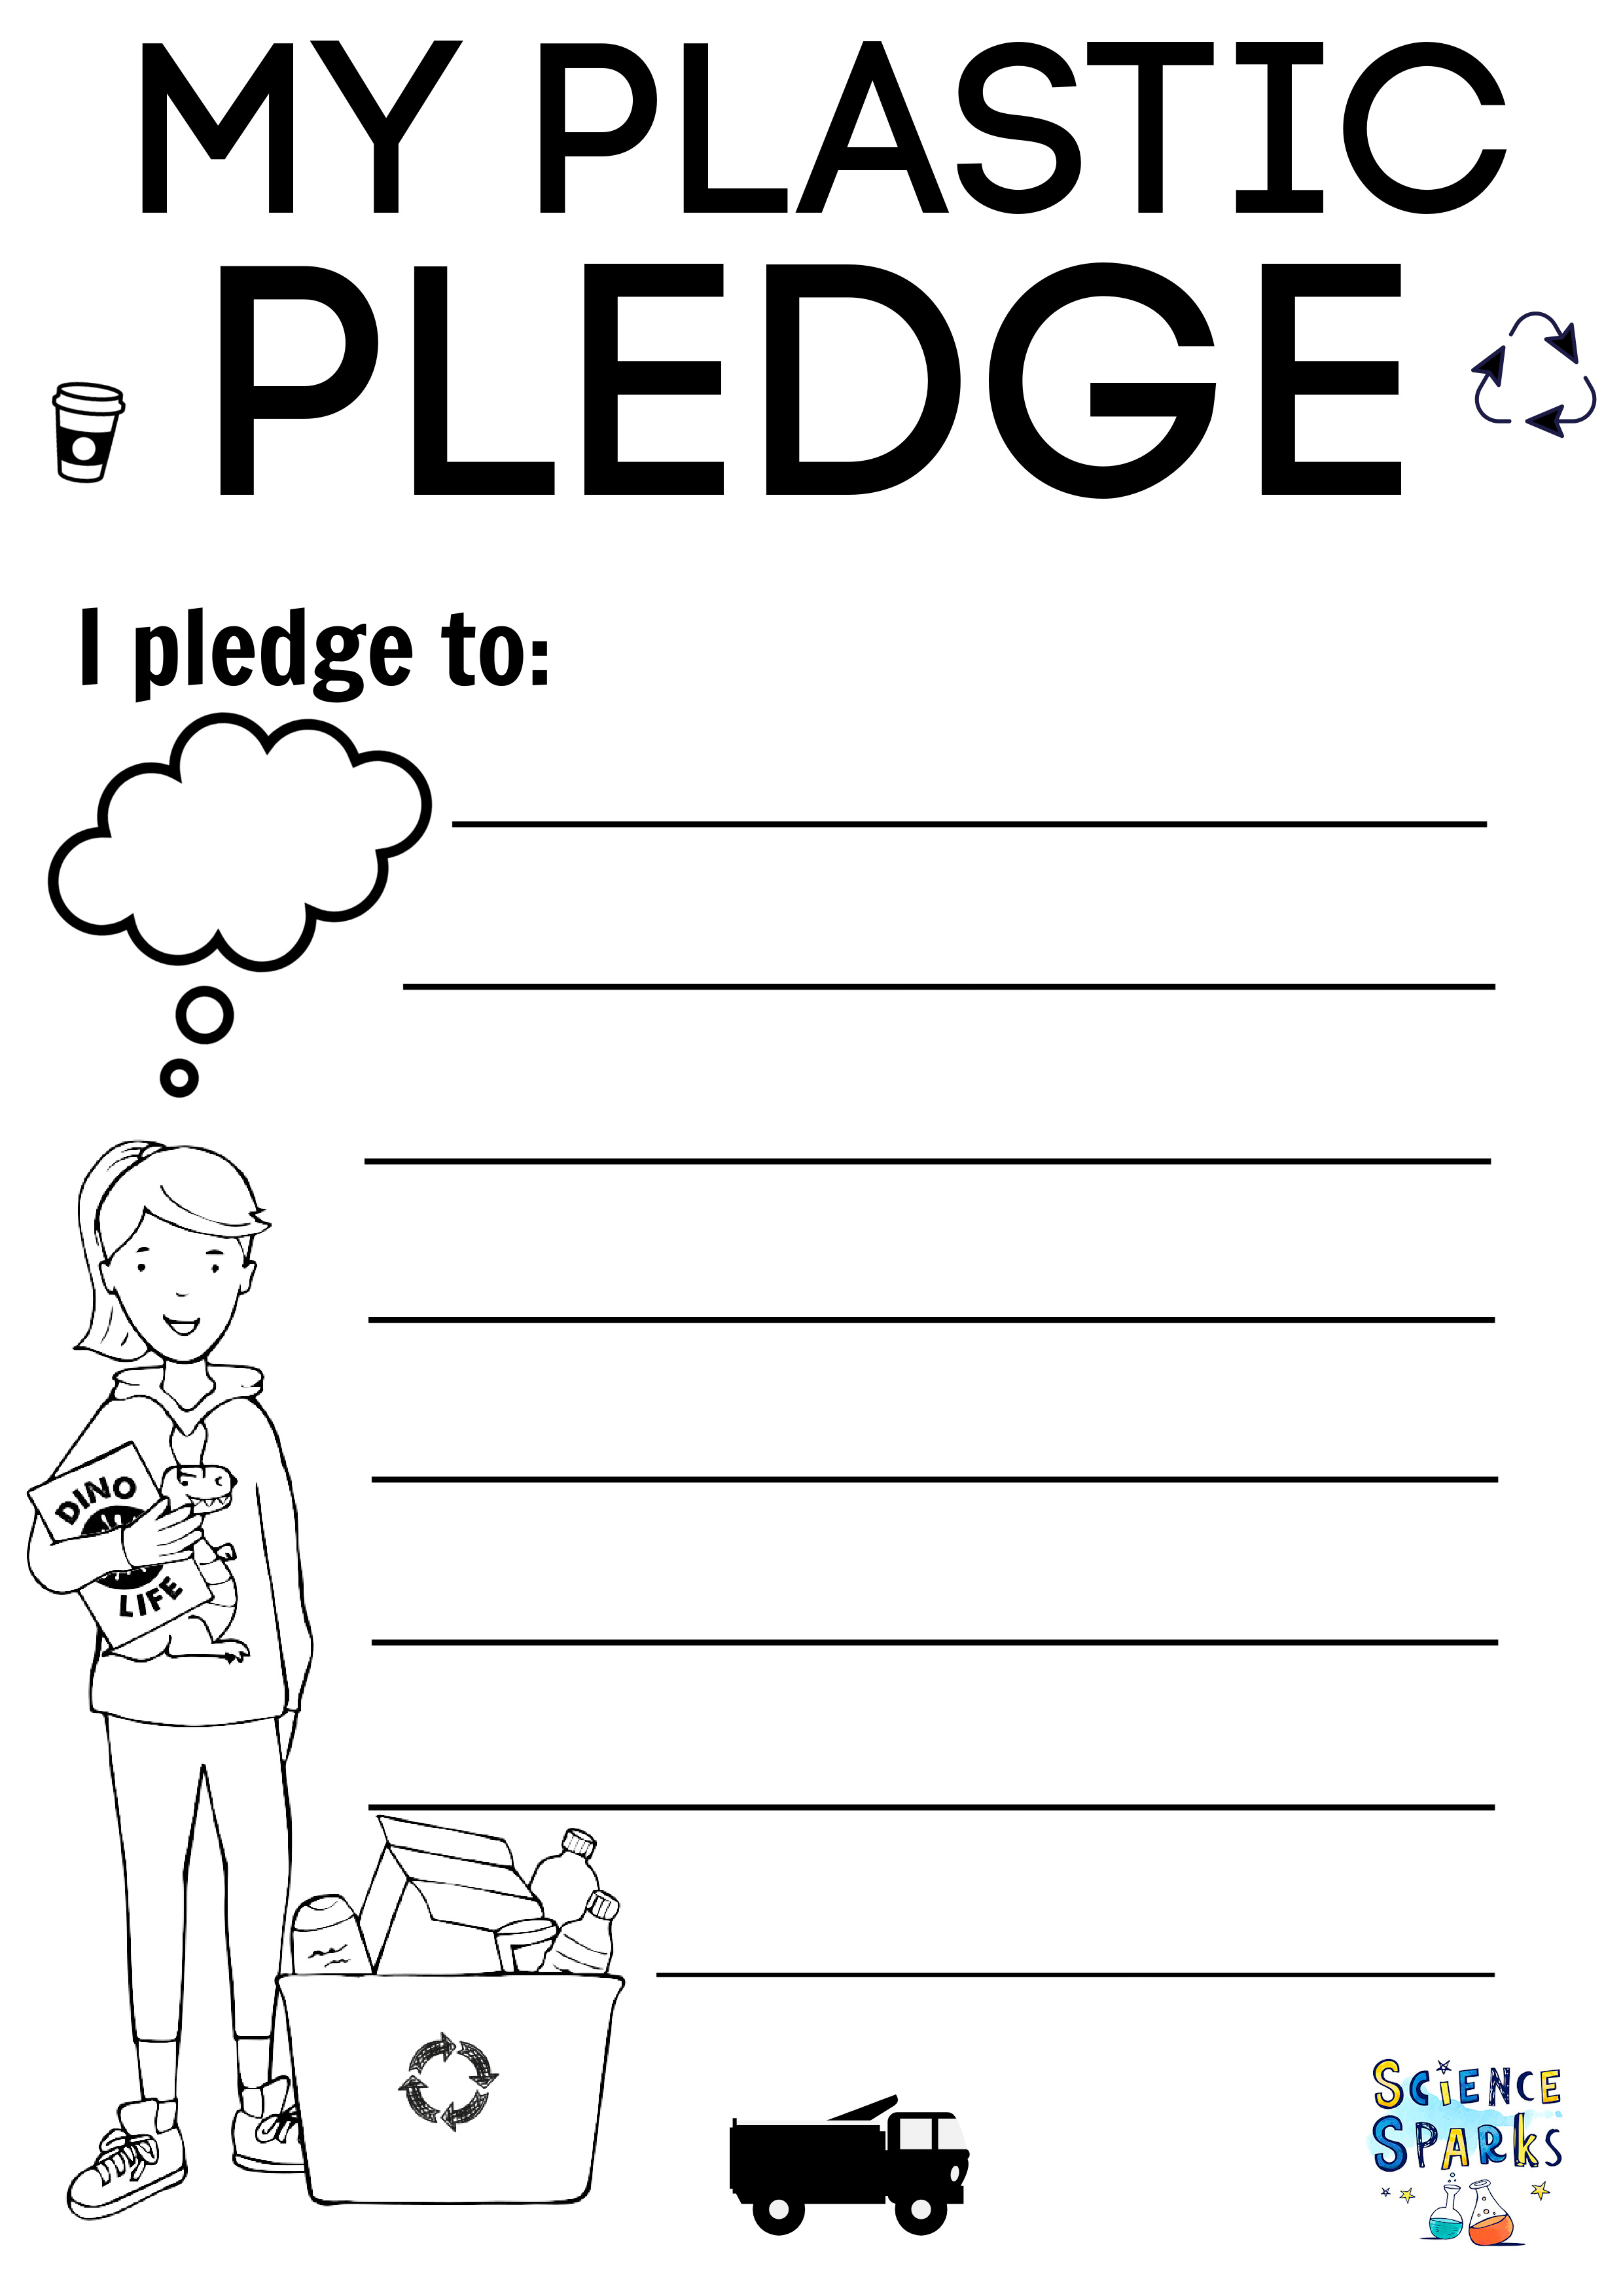 Plastic Pledge template. Children can complete their very own plastic pledge